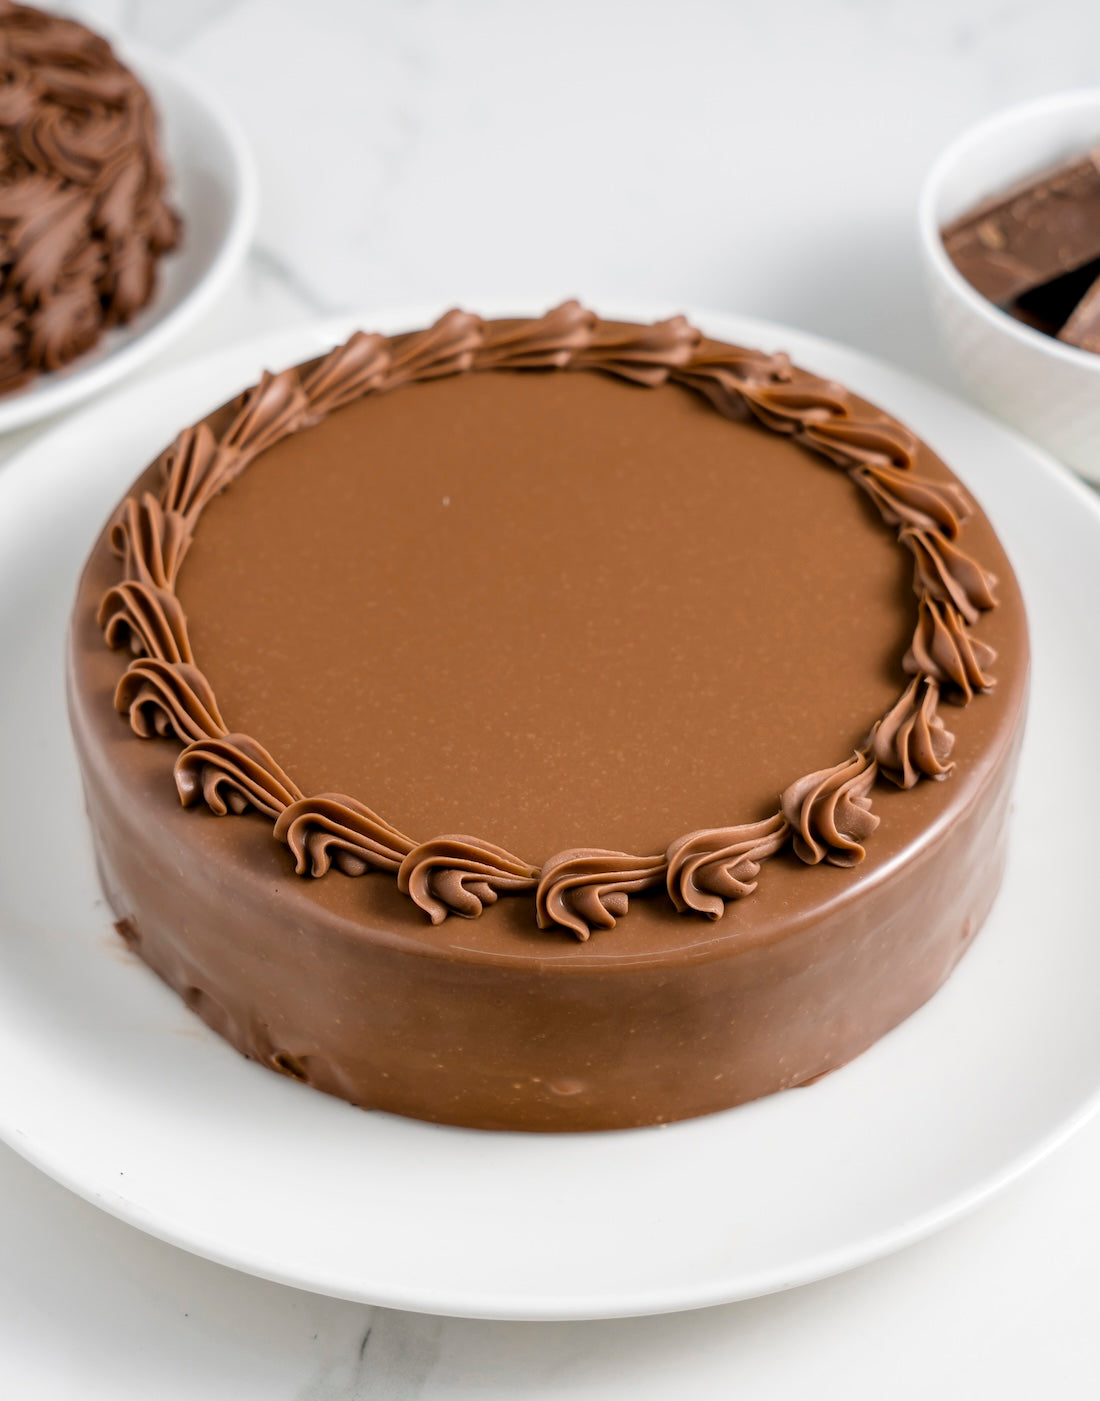 Buy cakes online | Chocolate cake gifts delivery -Presto '